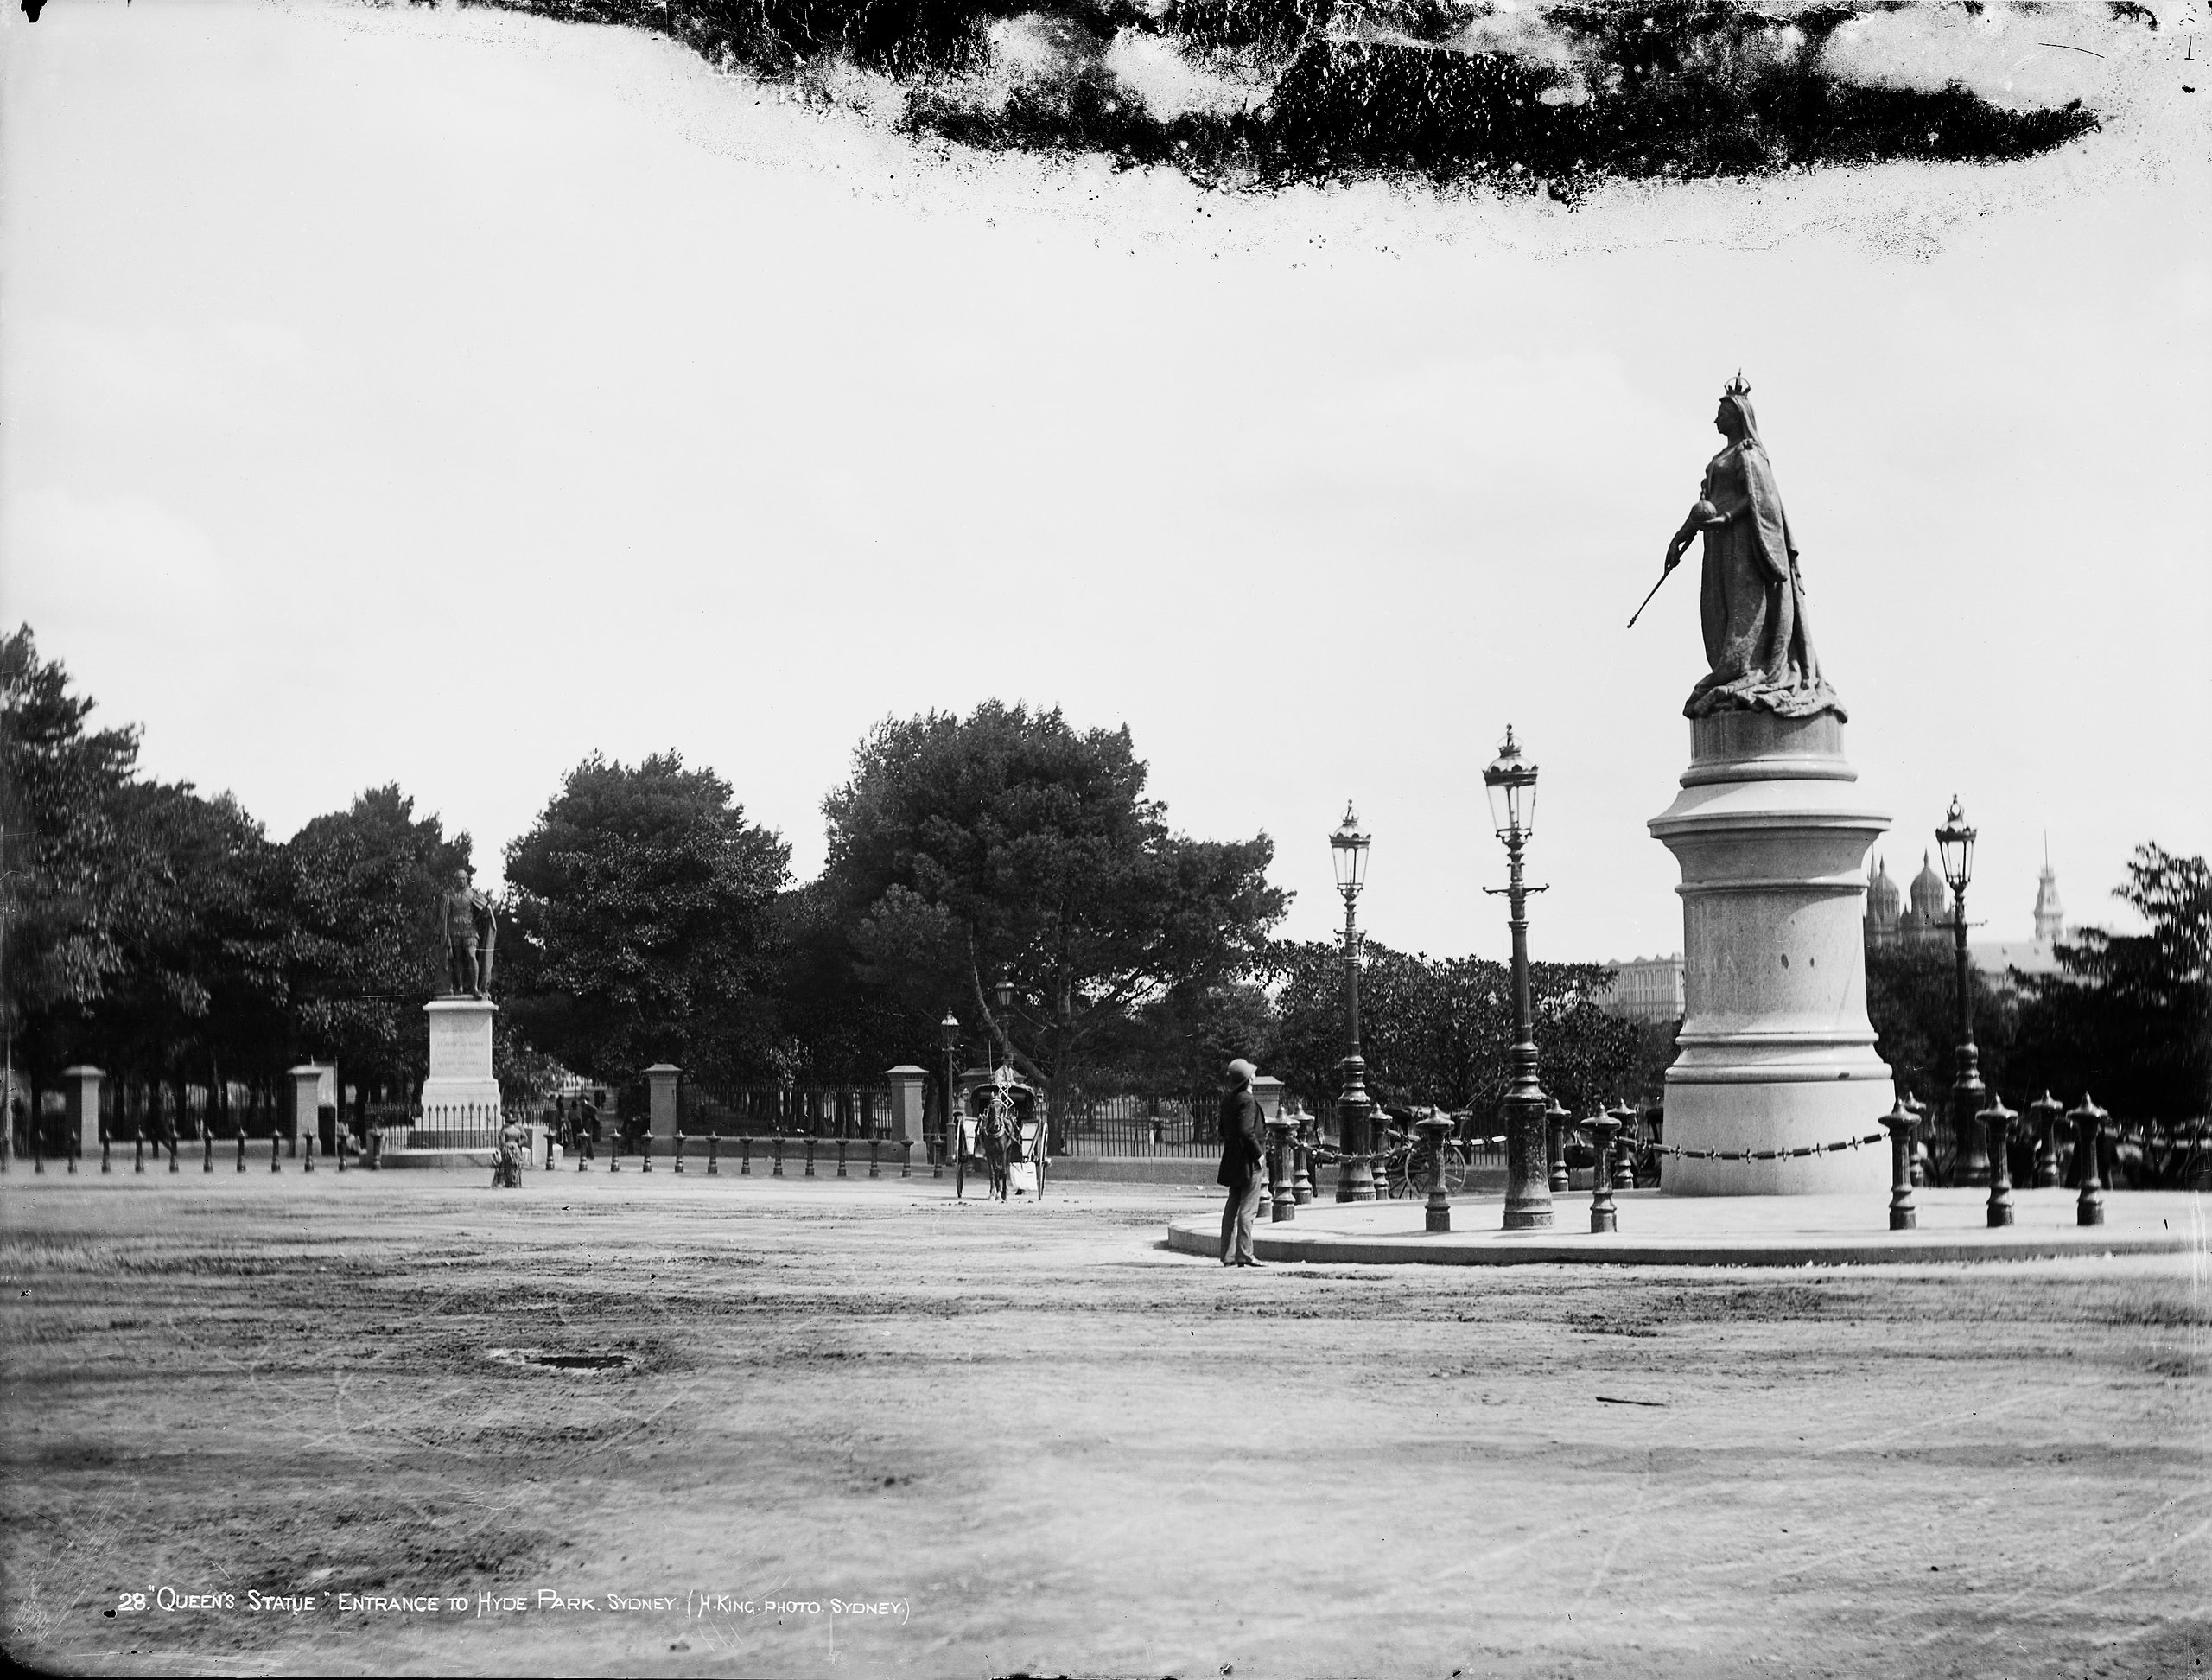 'Queens Statue, Entrance to Hyde Park, Sydney' by Henry King